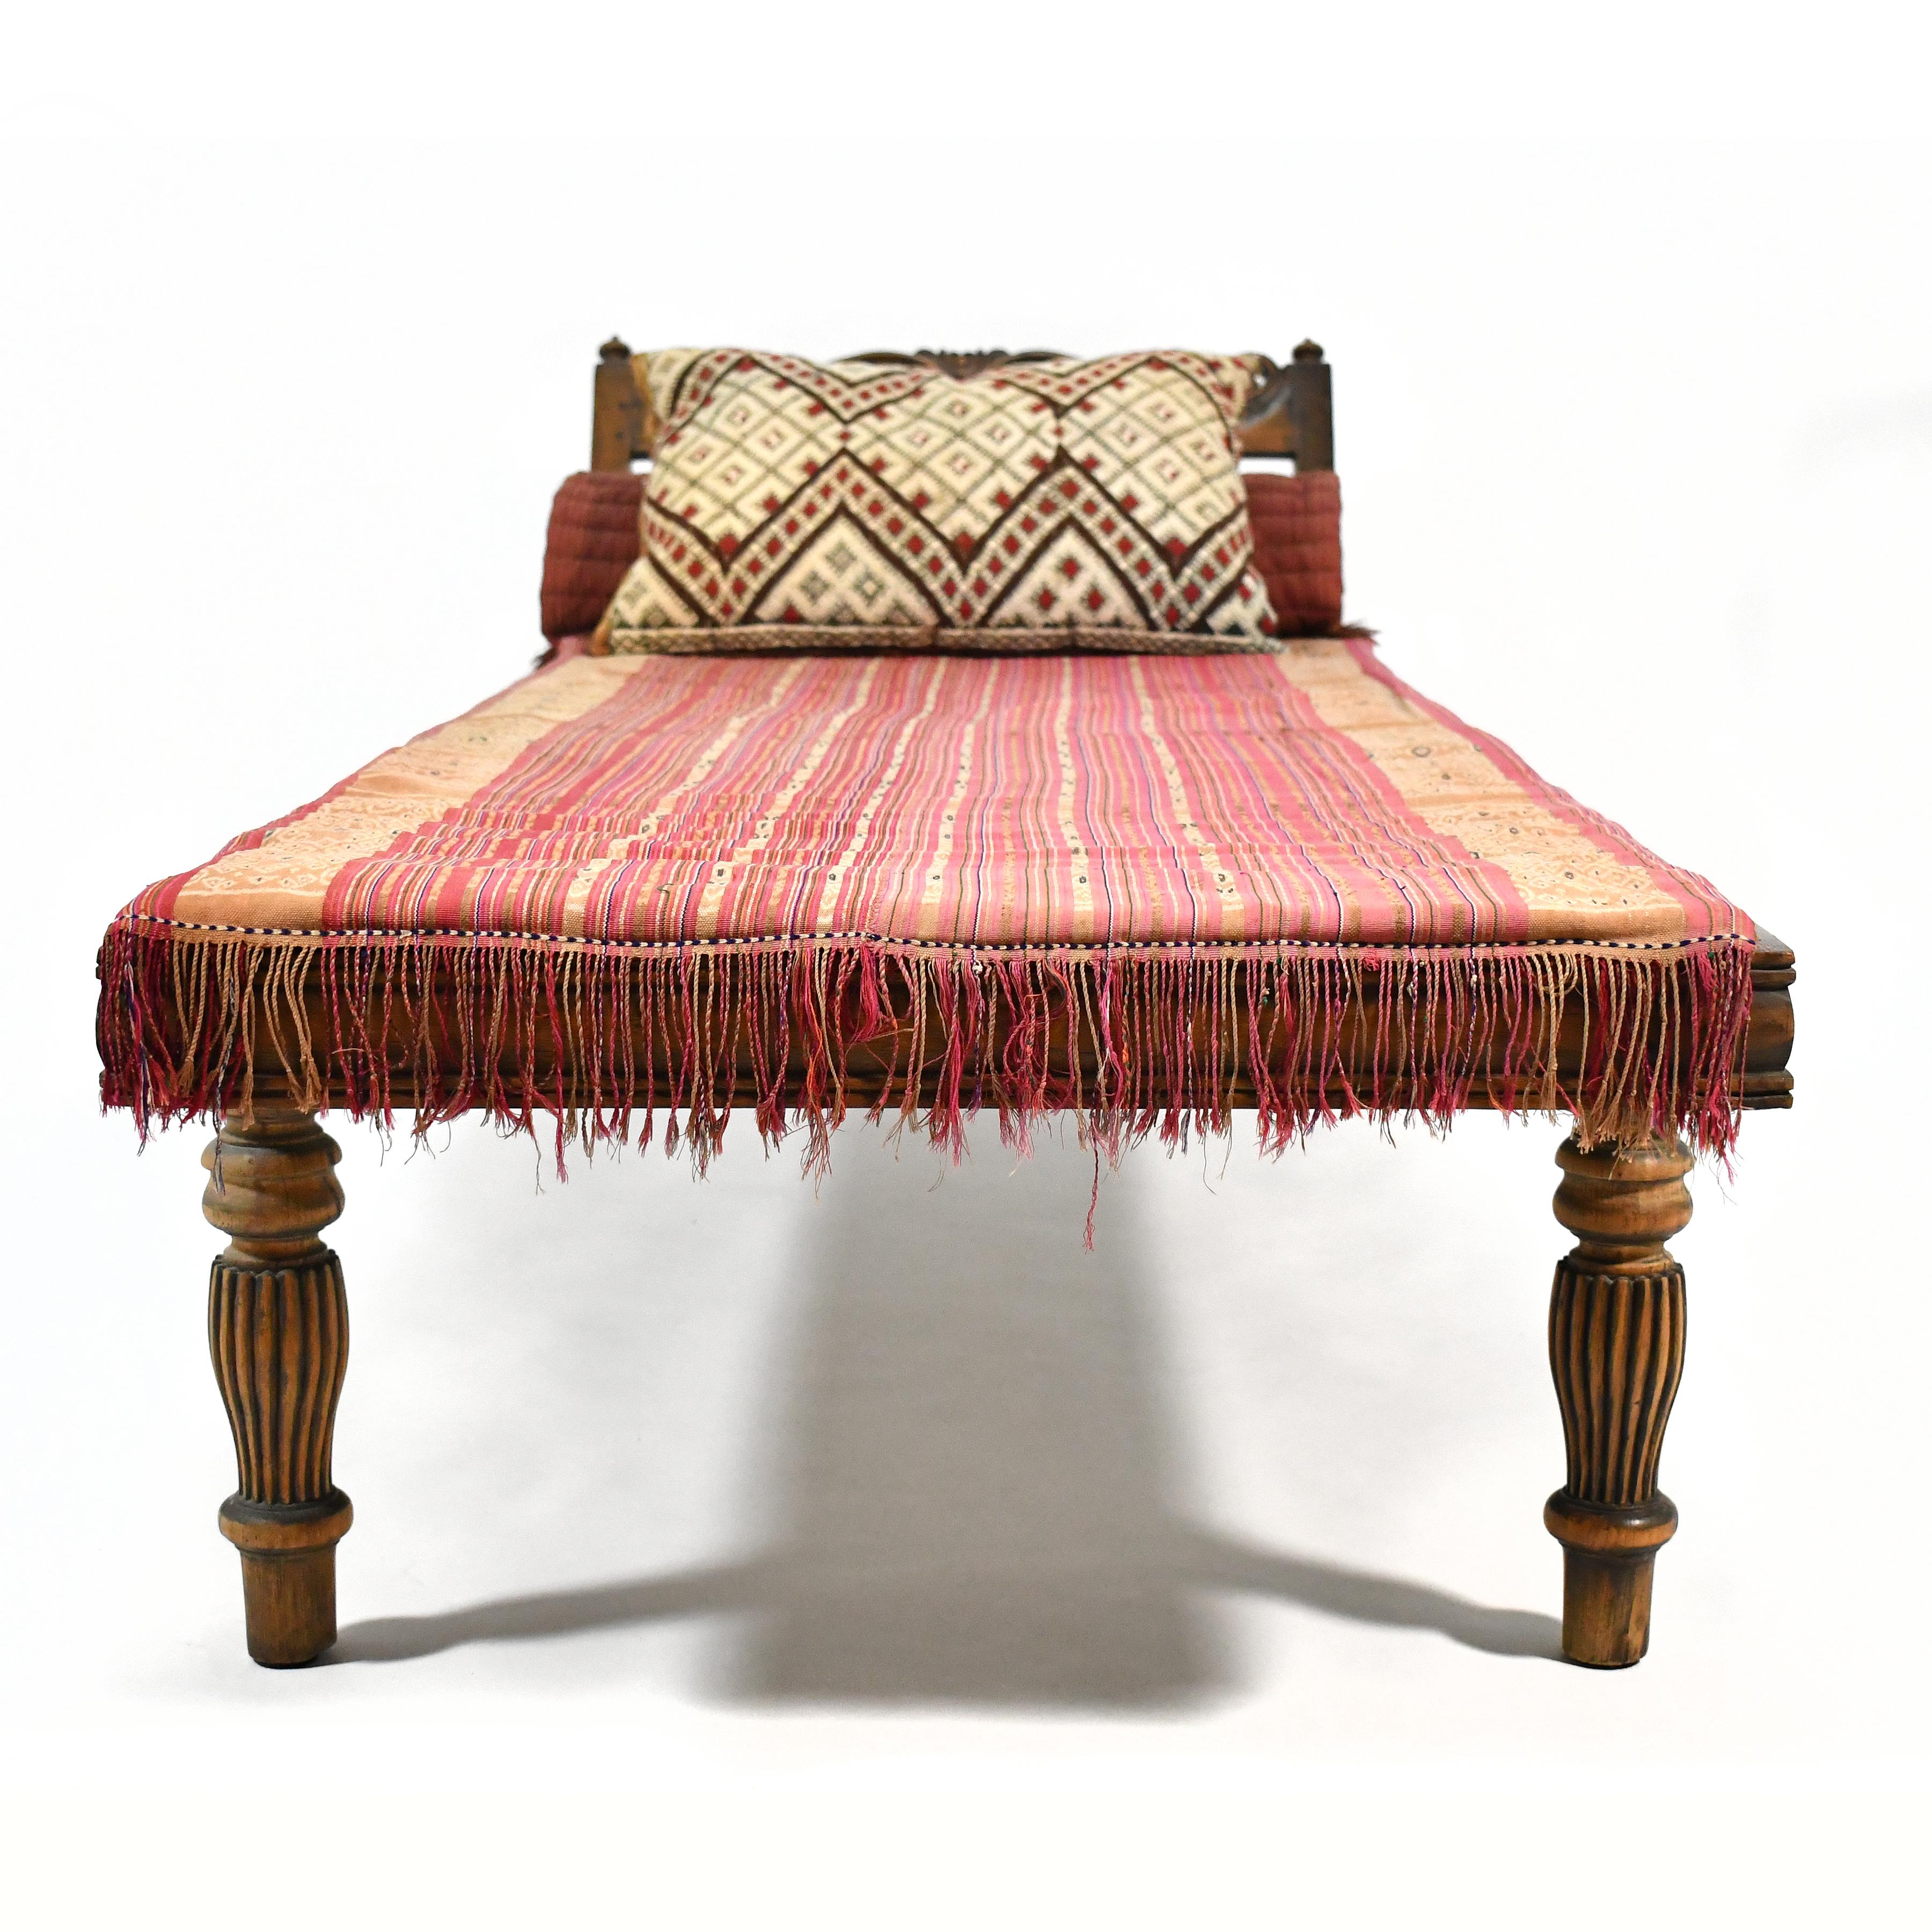 Teak and Cane Colonial Chaise Lounge In Good Condition For Sale In Highland, IN